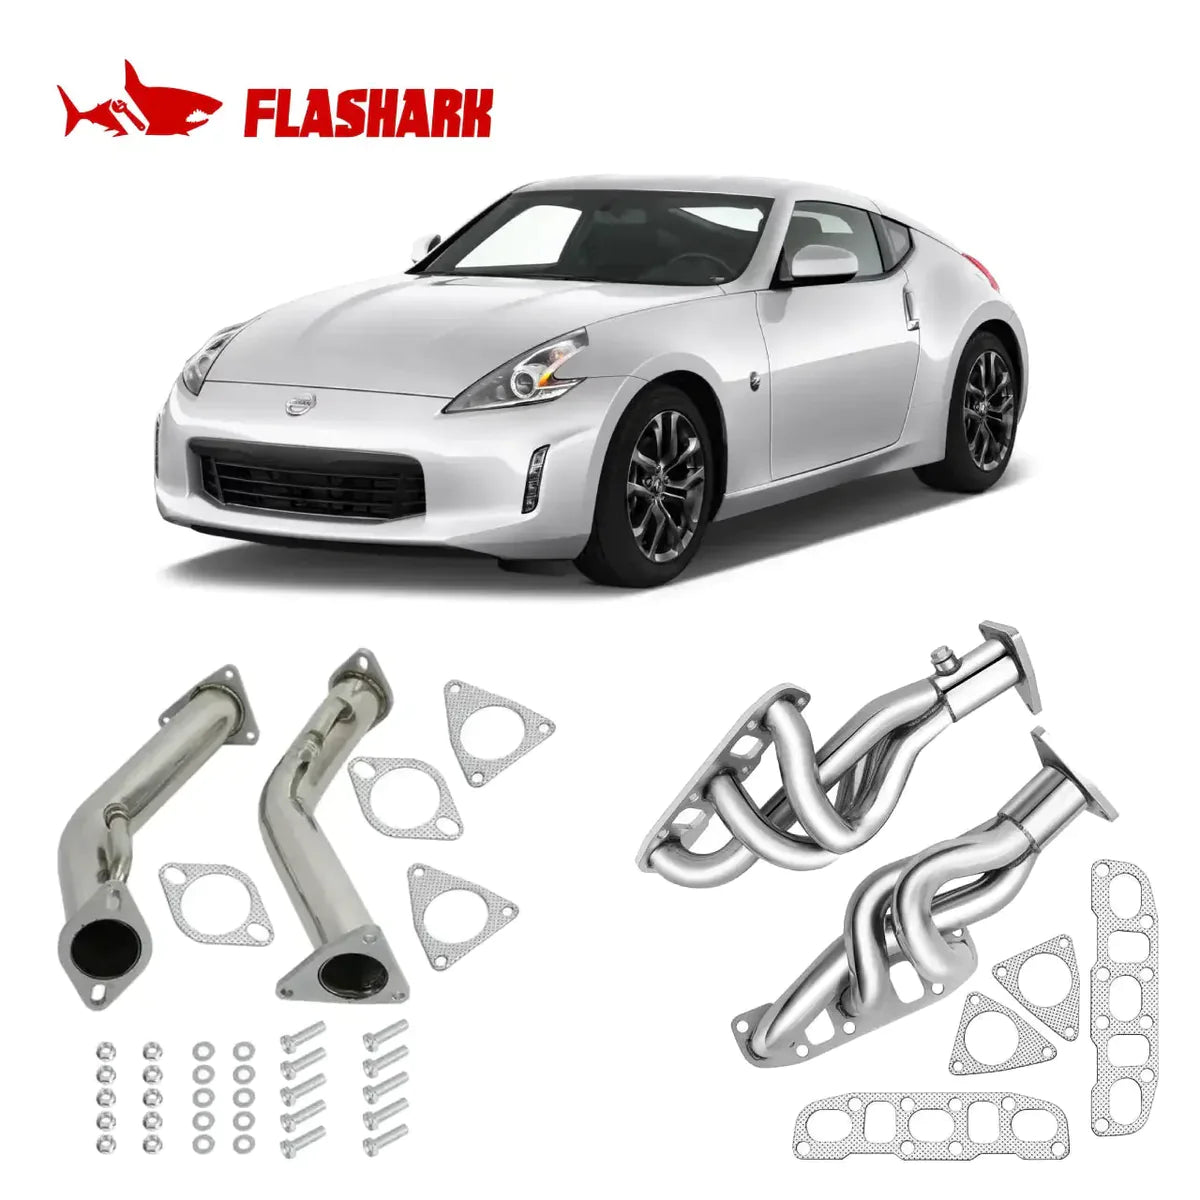 Exhaust Header/Downpipe Exhaust All-In-One Kit for 2009-2013 Nissan 370Z /Infiniti G37 G37X G37XS 3.7L